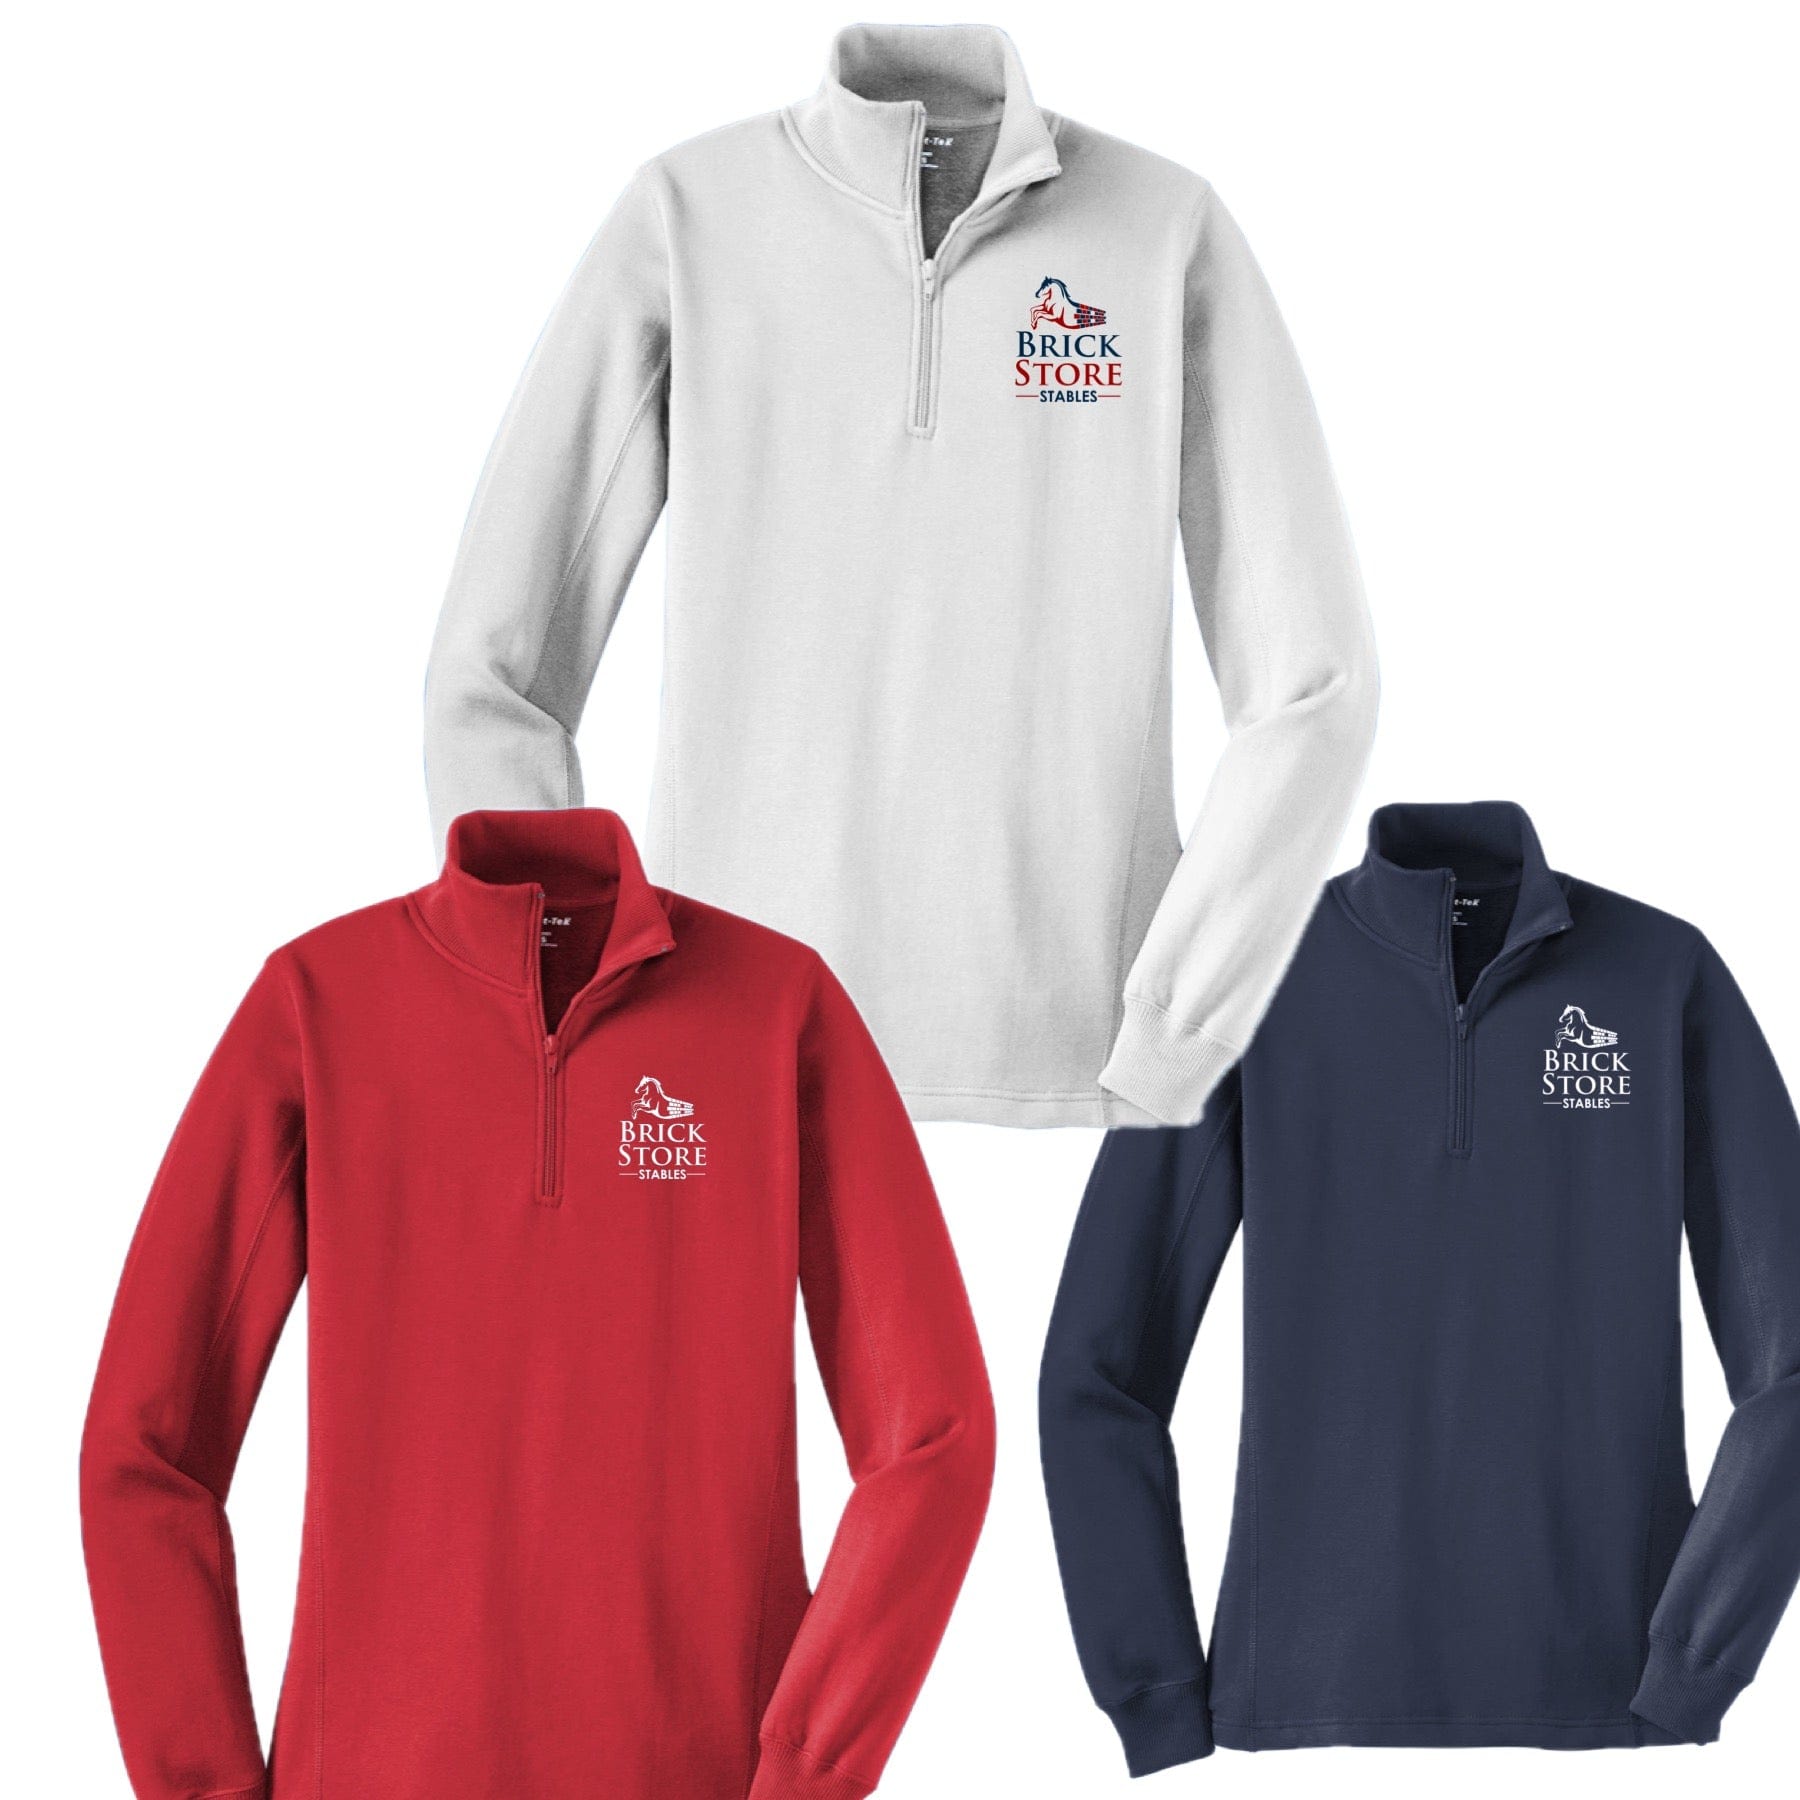 Equestrian Team Apparel Brick Store Stables 1/4 Zip Sweatshirt equestrian team apparel online tack store mobile tack store custom farm apparel custom show stable clothing equestrian lifestyle horse show clothing riding clothes horses equestrian tack store